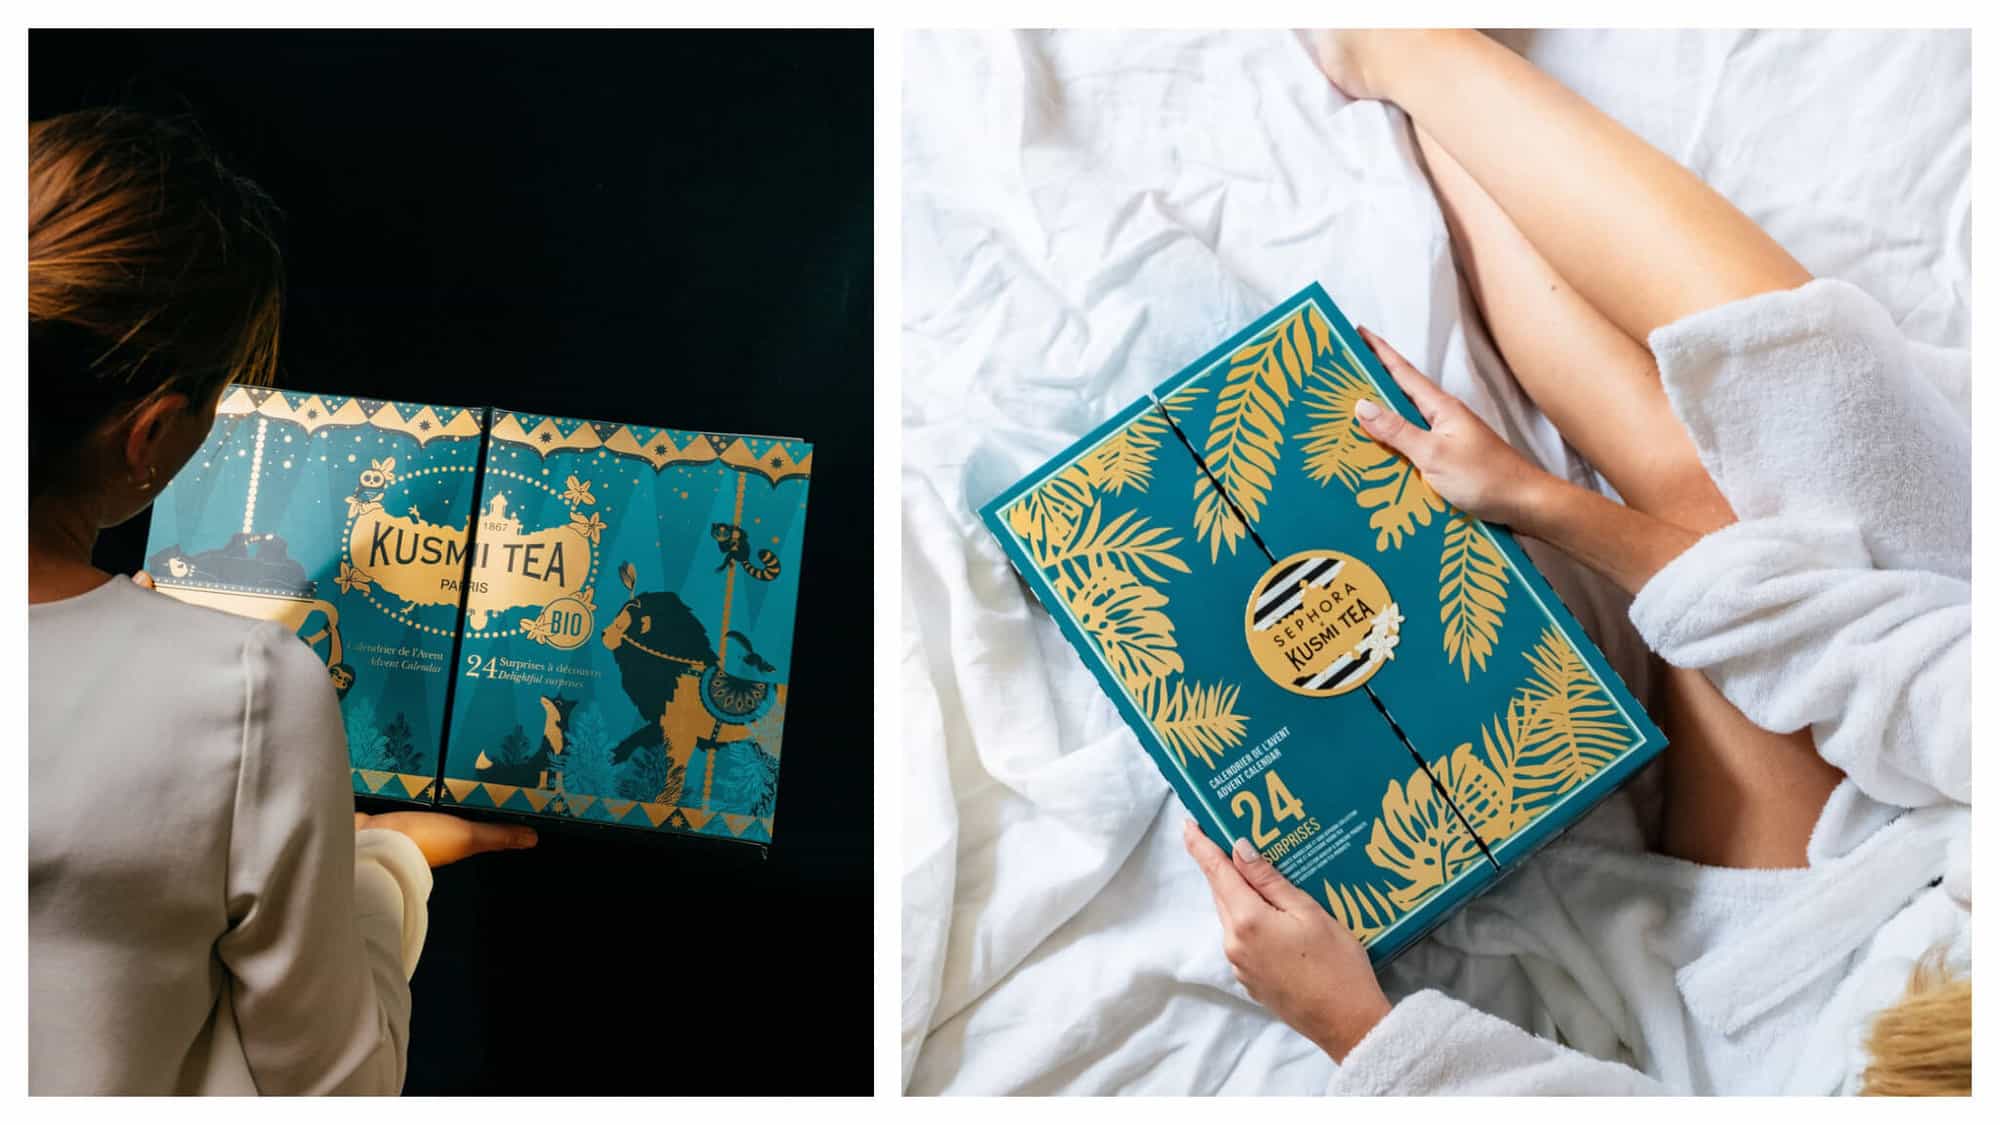 Left: A woman pictured from behind holds a turquoise and gold gift box from Kusmi Tea against a black background. Right: A woman in a white bathrobe sits on white sheets holding a turquoise and gold Kusmi tea gift box.